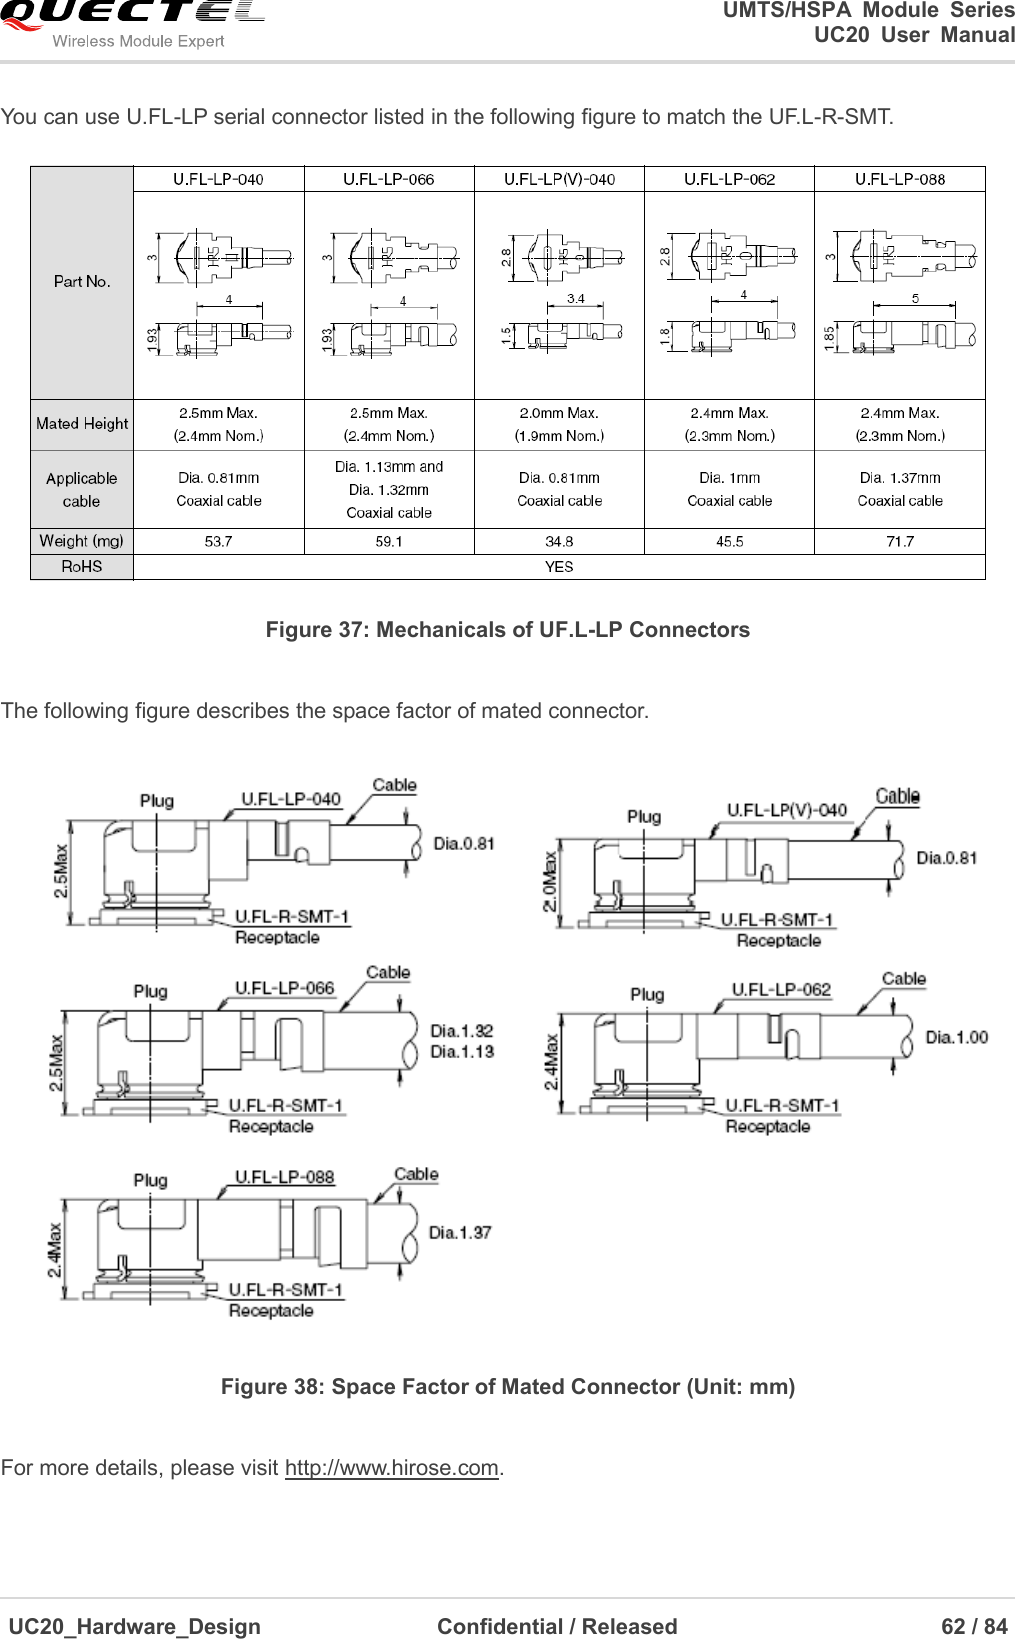                                                                                                                                               UMTS/HSPA  Module  Series                                                                 UC20  User  Manual  UC20_Hardware_Design                  Confidential / Released                            62 / 84     You can use U.FL-LP serial connector listed in the following figure to match the UF.L-R-SMT.  Figure 37: Mechanicals of UF.L-LP Connectors  The following figure describes the space factor of mated connector.  Figure 38: Space Factor of Mated Connector (Unit: mm)  For more details, please visit http://www.hirose.com. 